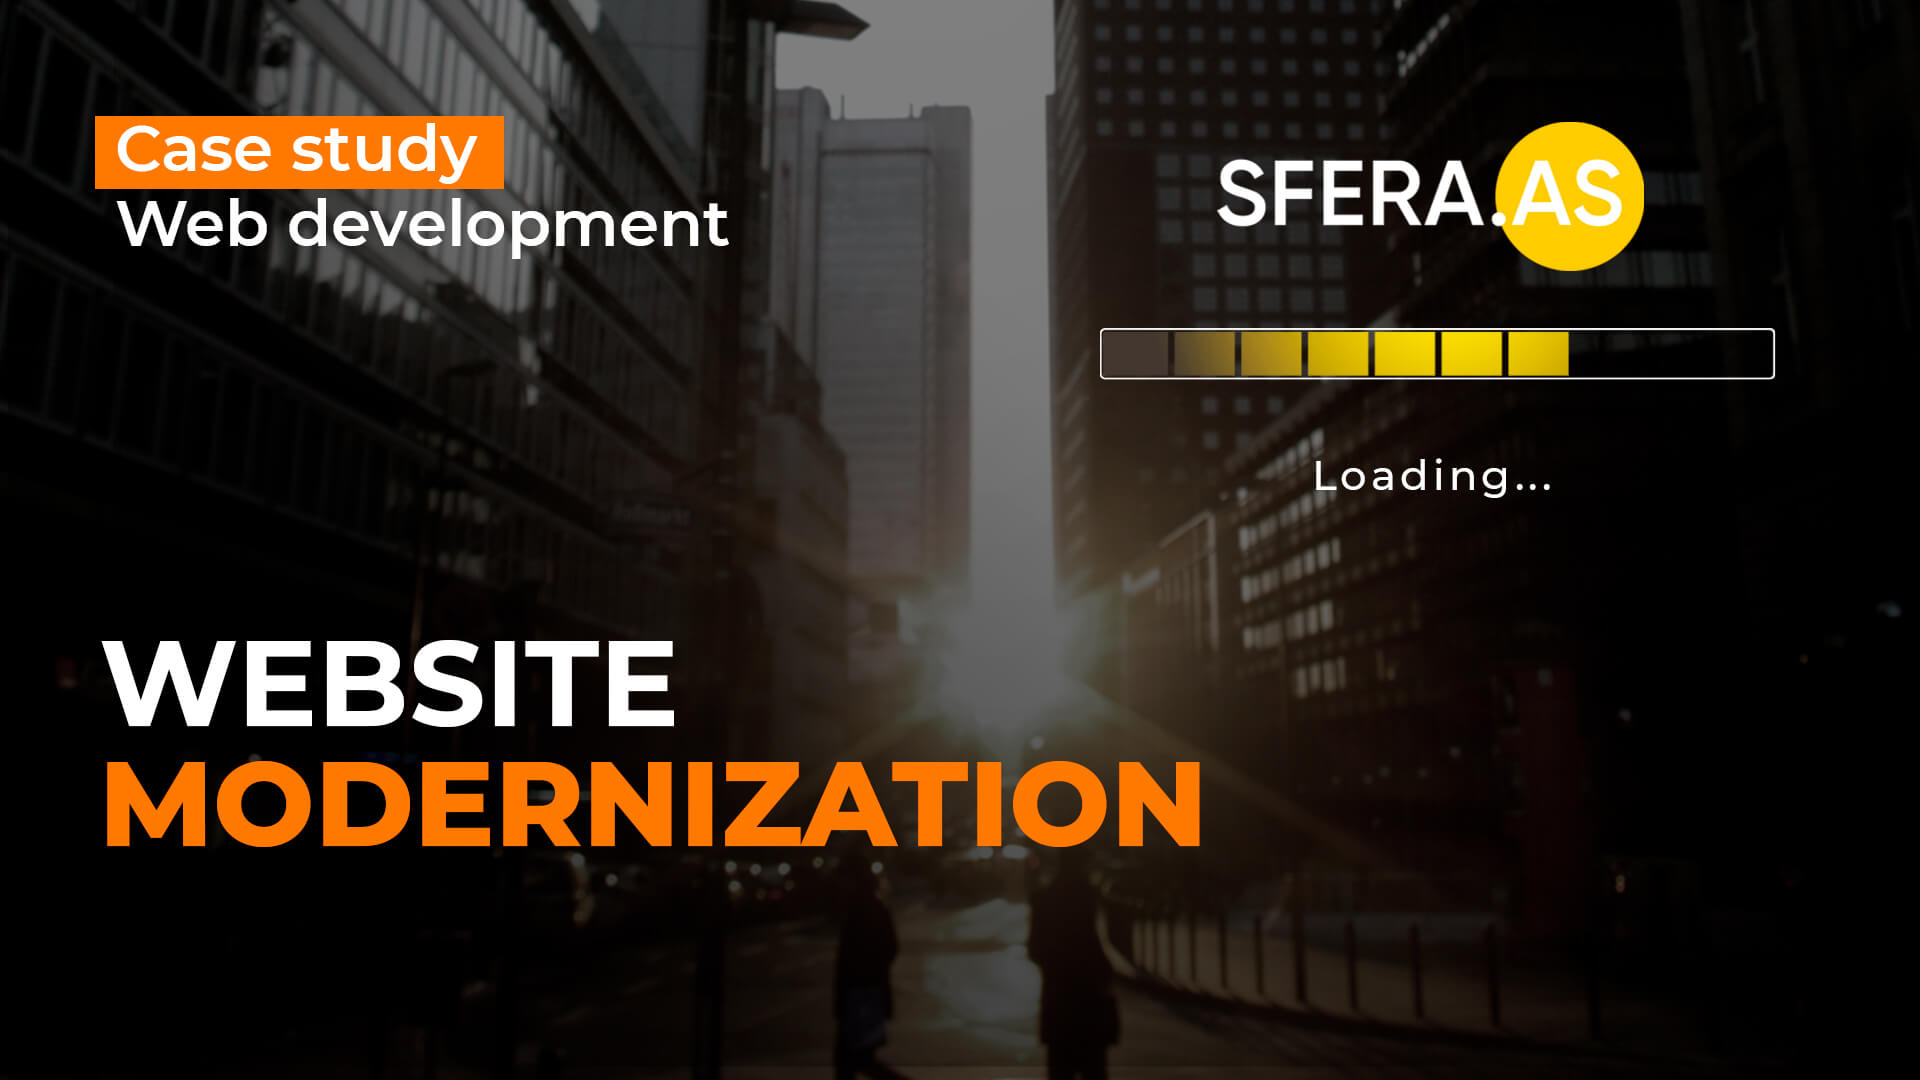 Case study on website modernization while maintaining SEO positions